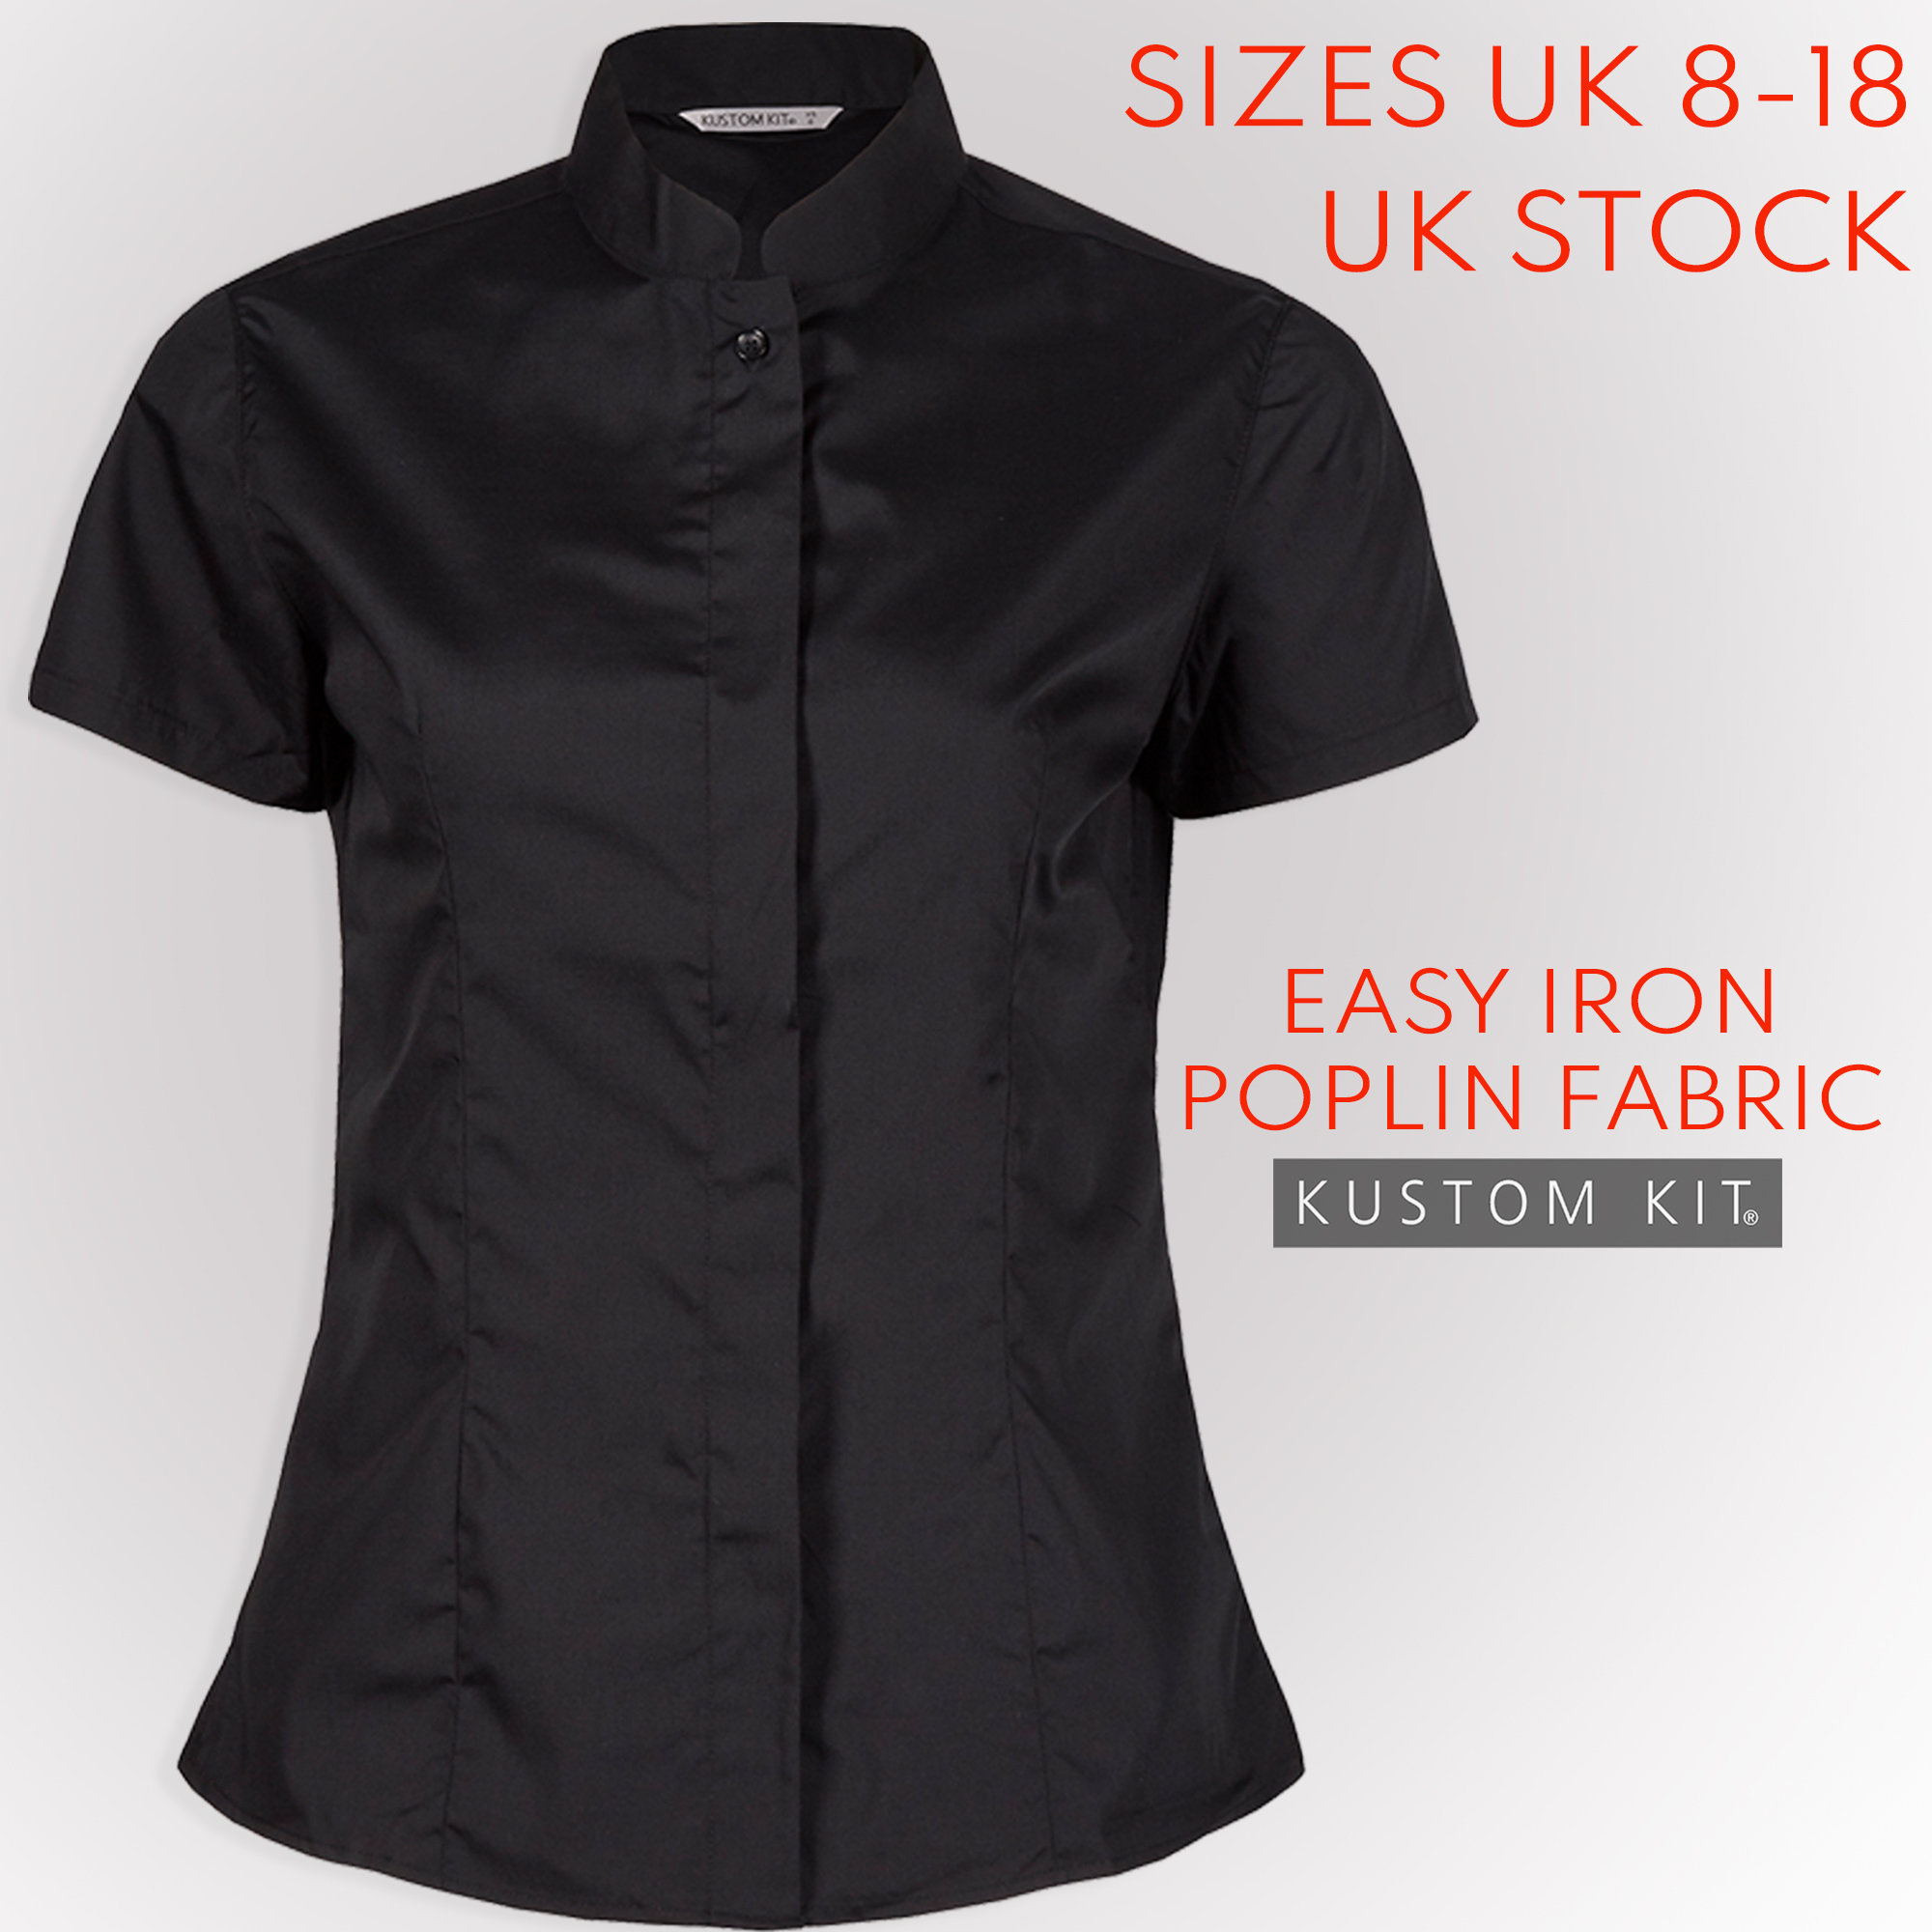 Ladies Black Smart Office Short Sleeve Shirt Tailored Fitted Collared